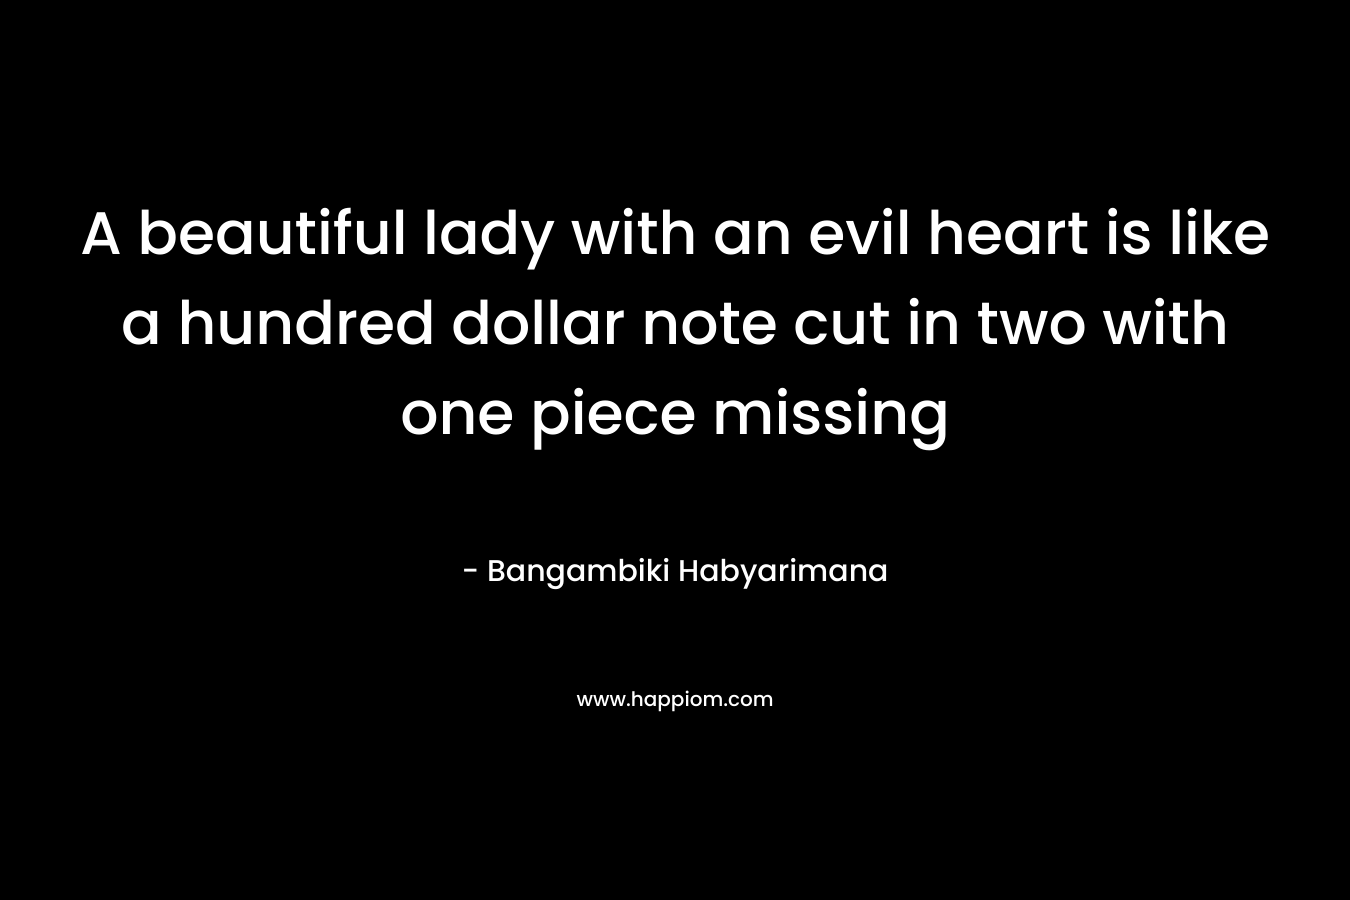 A beautiful lady with an evil heart is like a hundred dollar note cut in two with one piece missing – Bangambiki Habyarimana